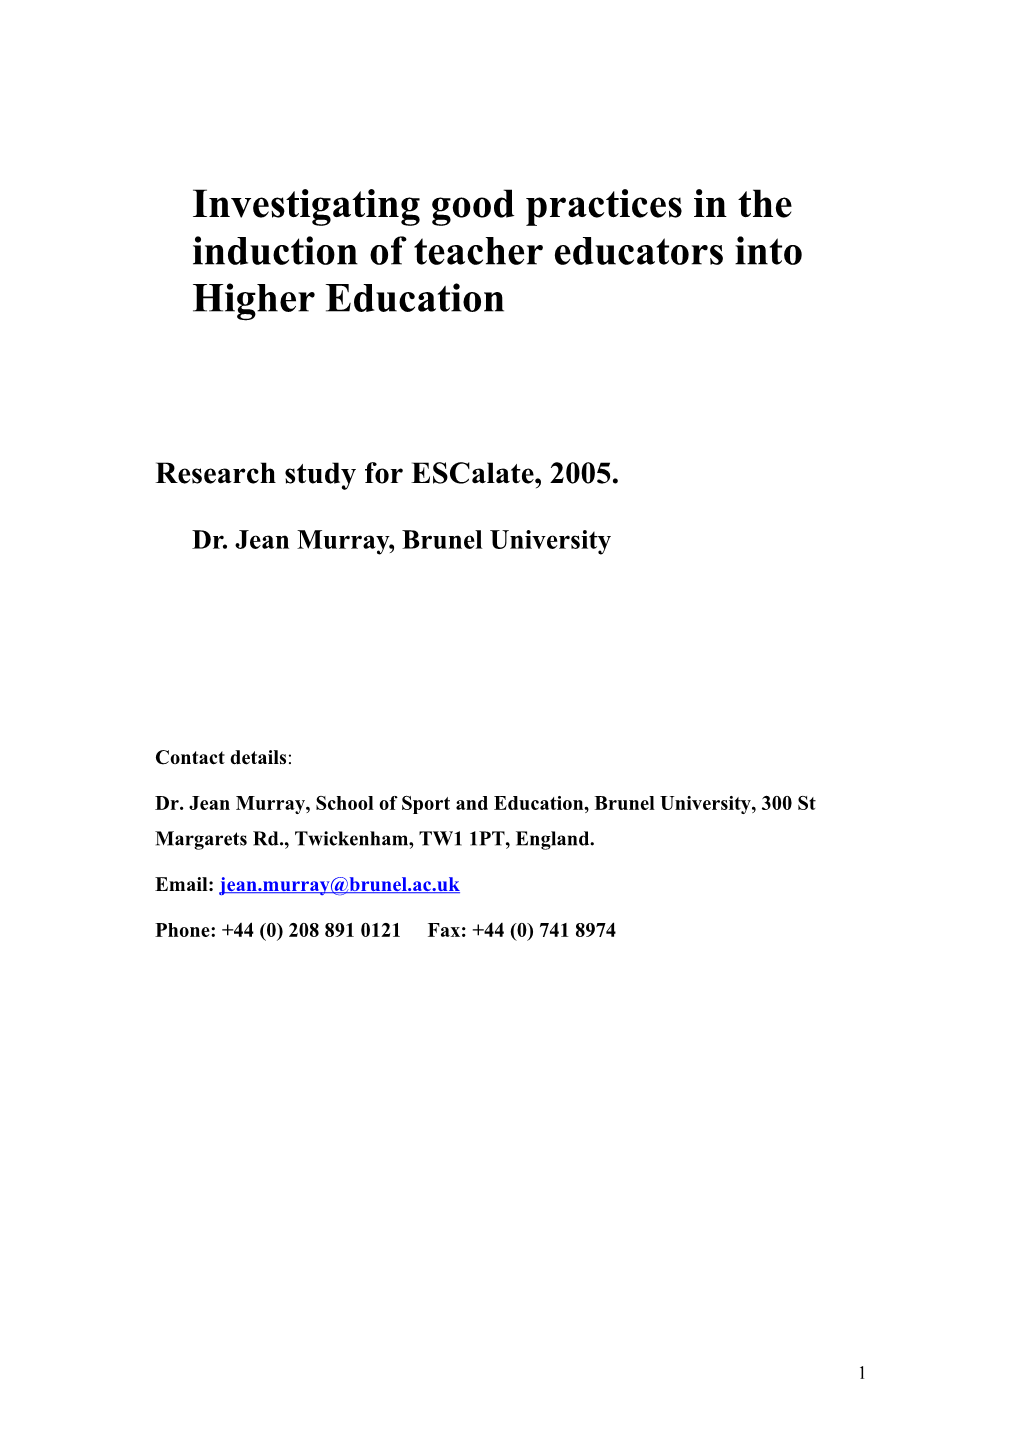 Investigating Good Practices in the Induction of Teacher Educators Into Higher Education